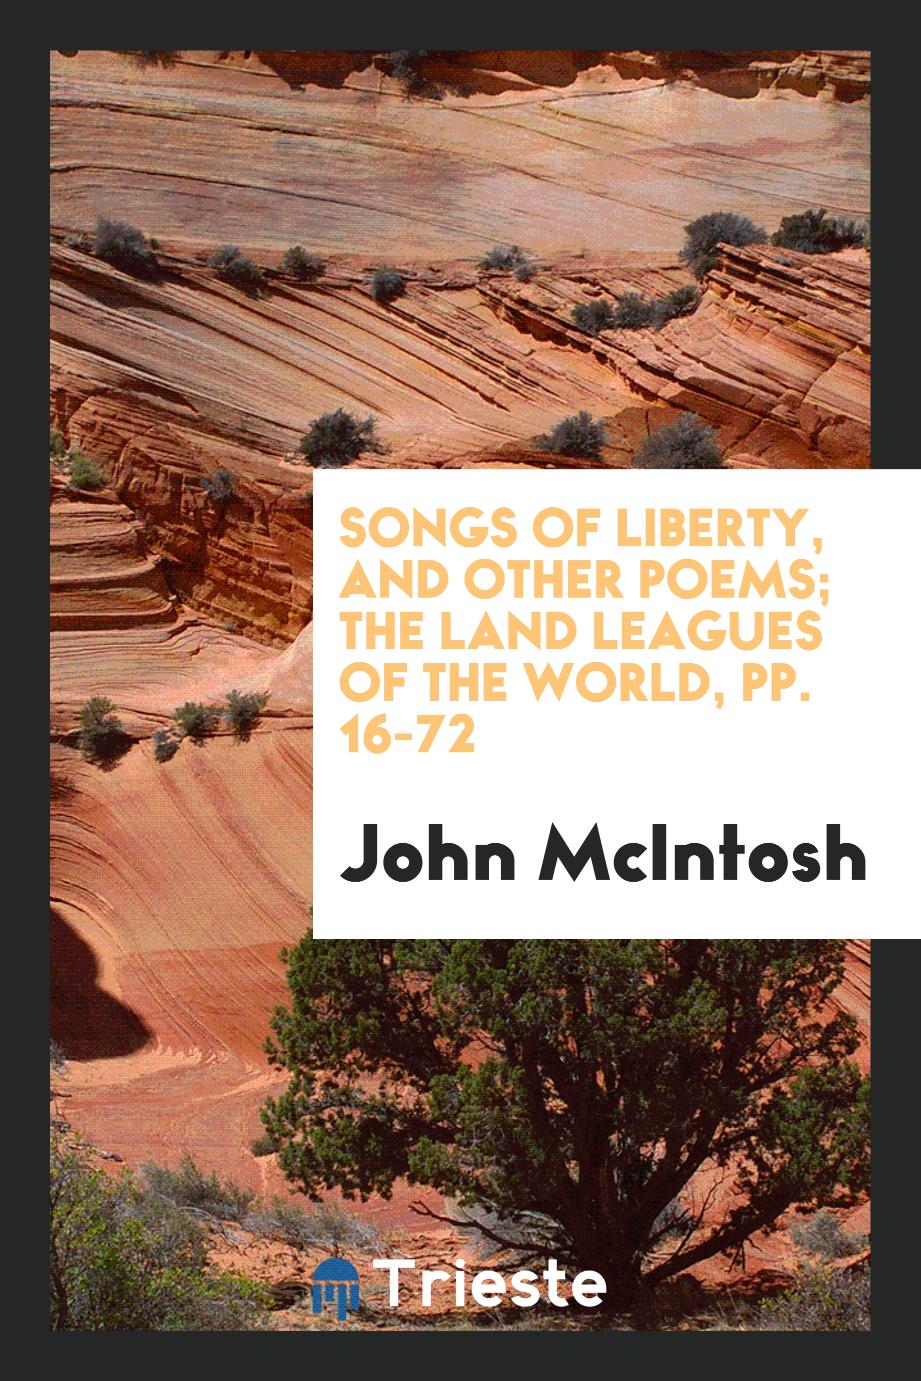 Songs of Liberty, and other poems; The Land Leagues of the world, pp. 16-72